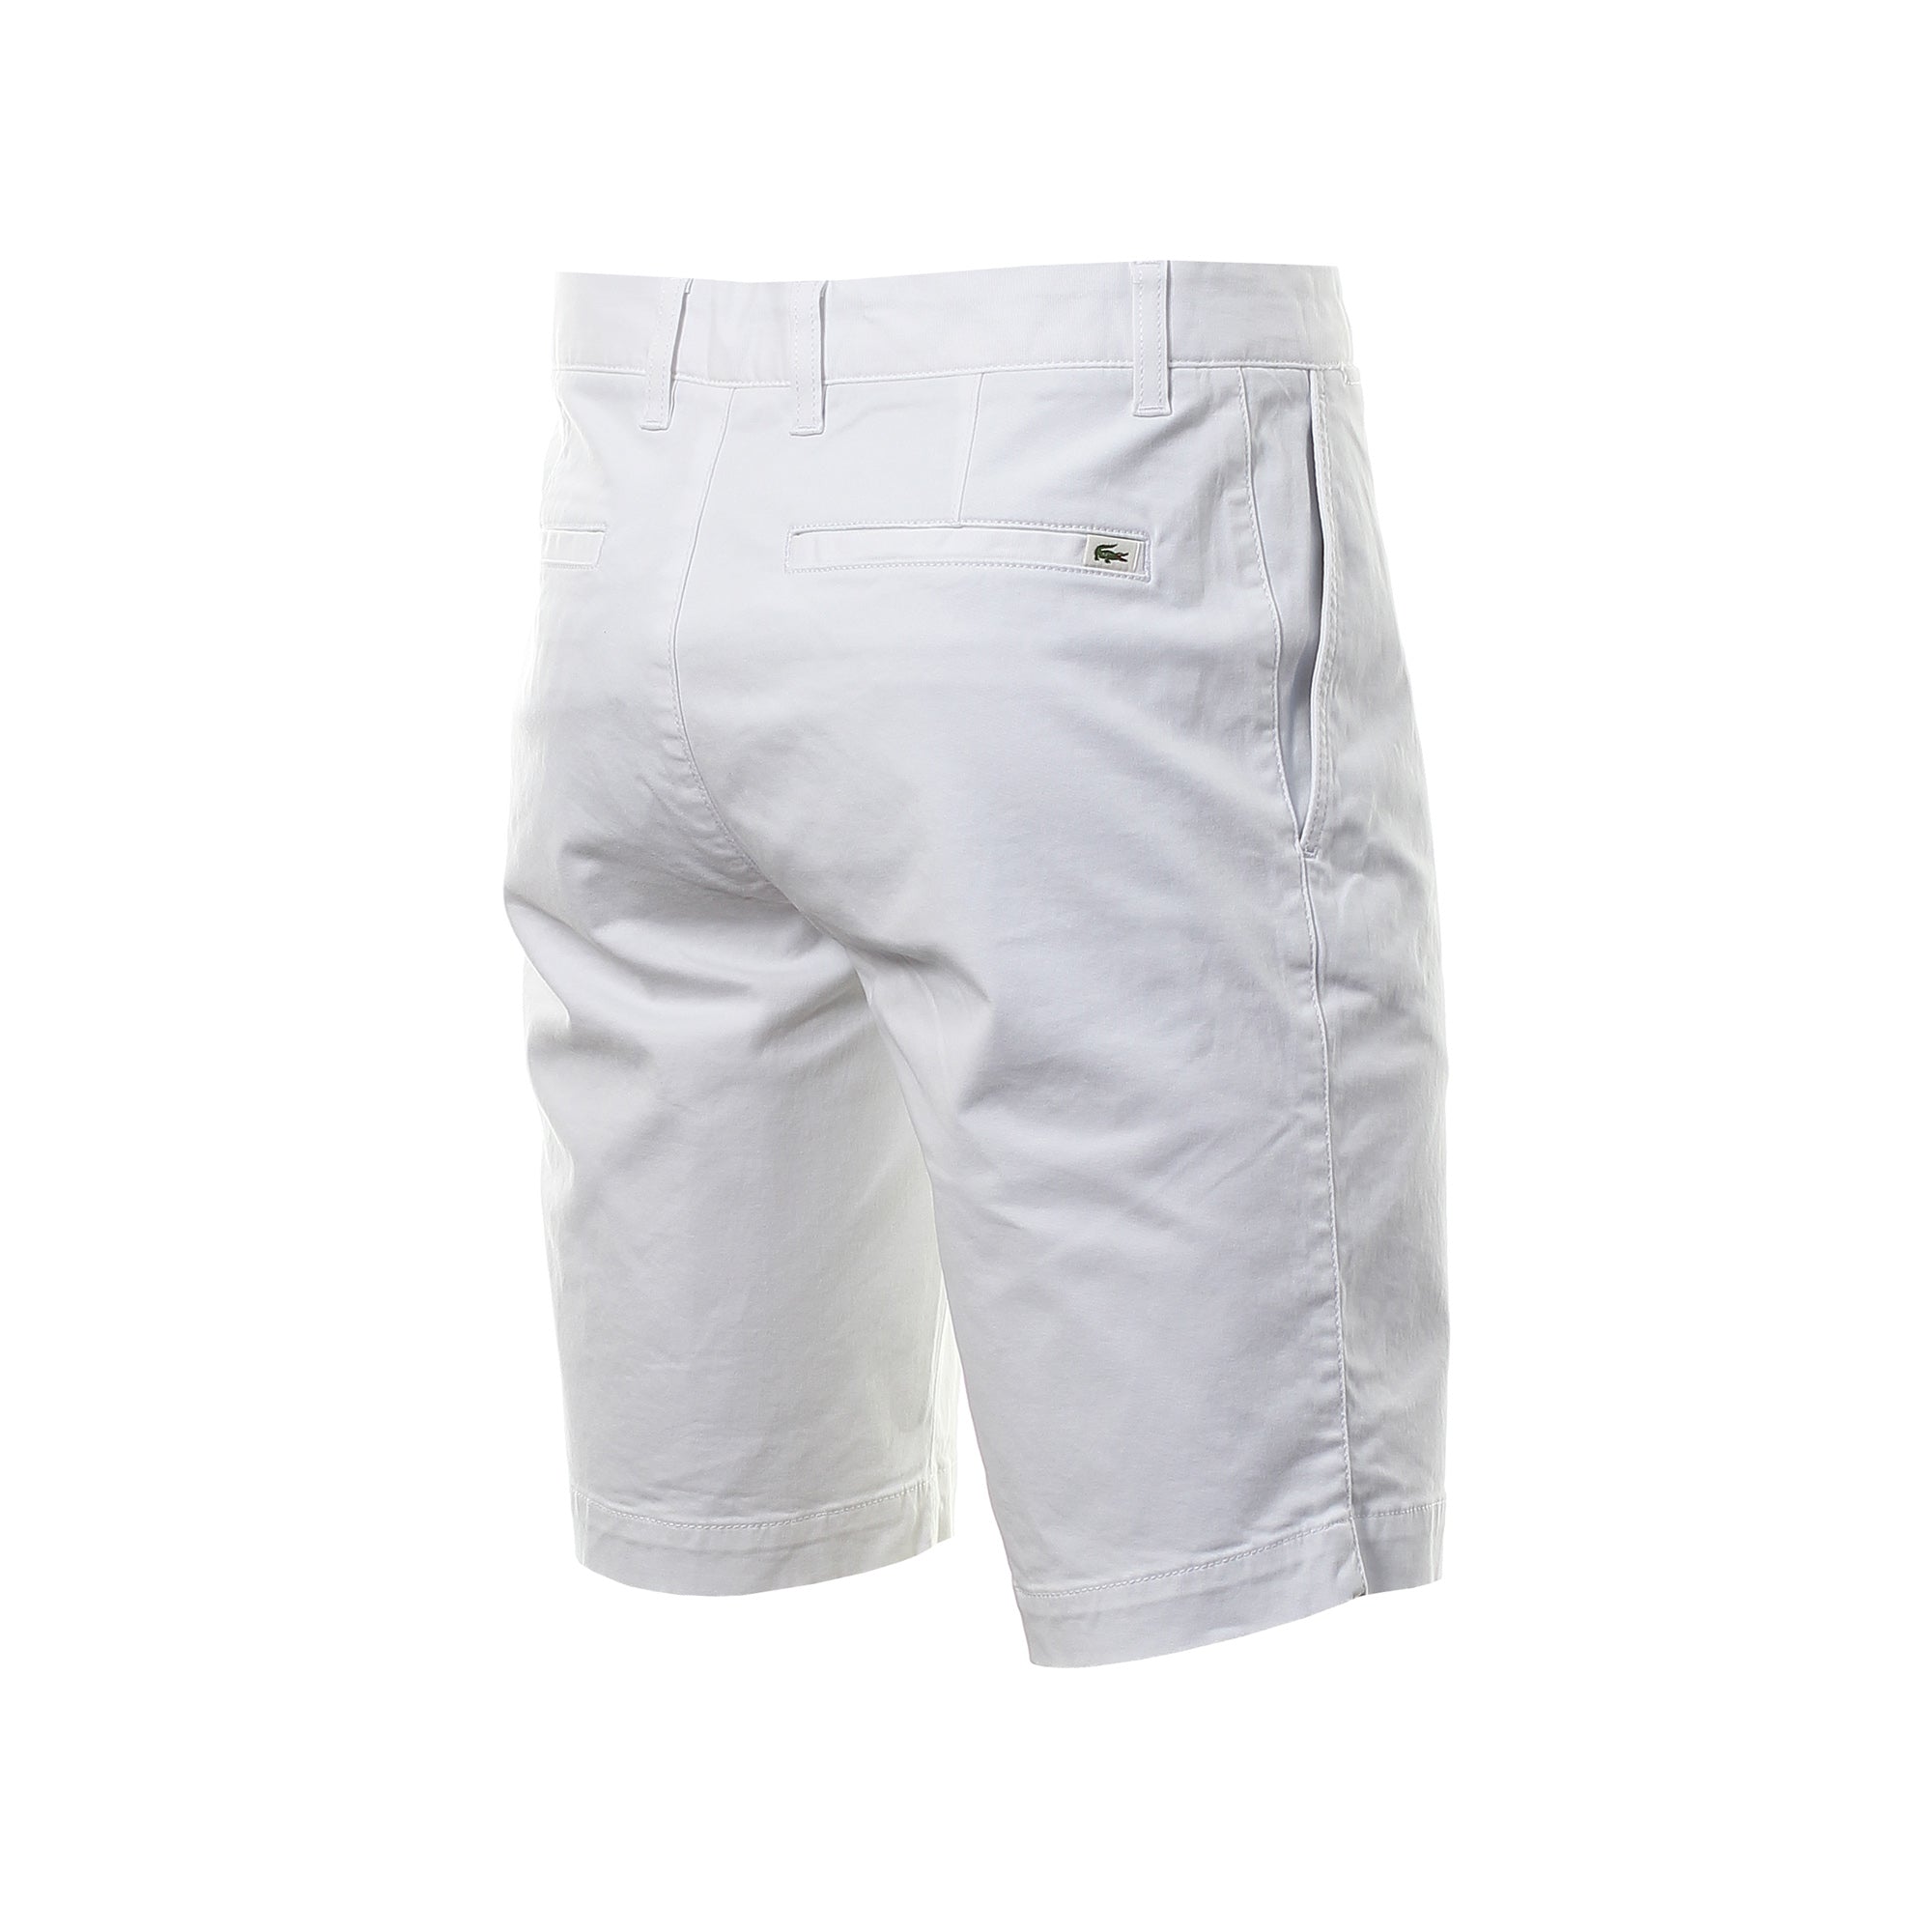 Lacoste Stretch Chino Short FH9542 White 001 | Function18